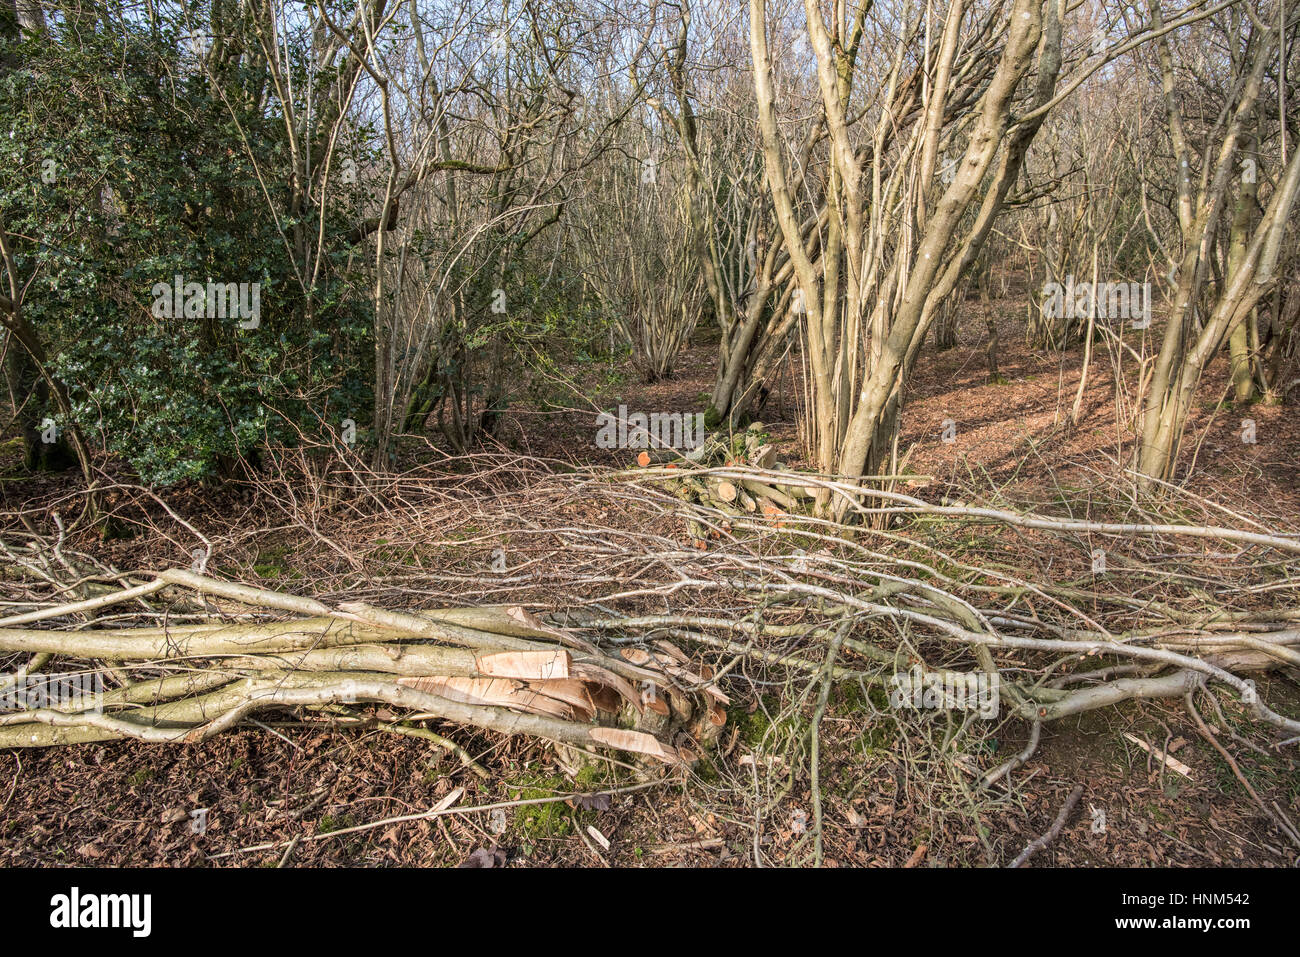 Hazel, Corylus avellana, hedge freshly layed in coppiced woodland, showing hedge laying technique, near Aysgarth Falls, North Yorkshire Stock Photo